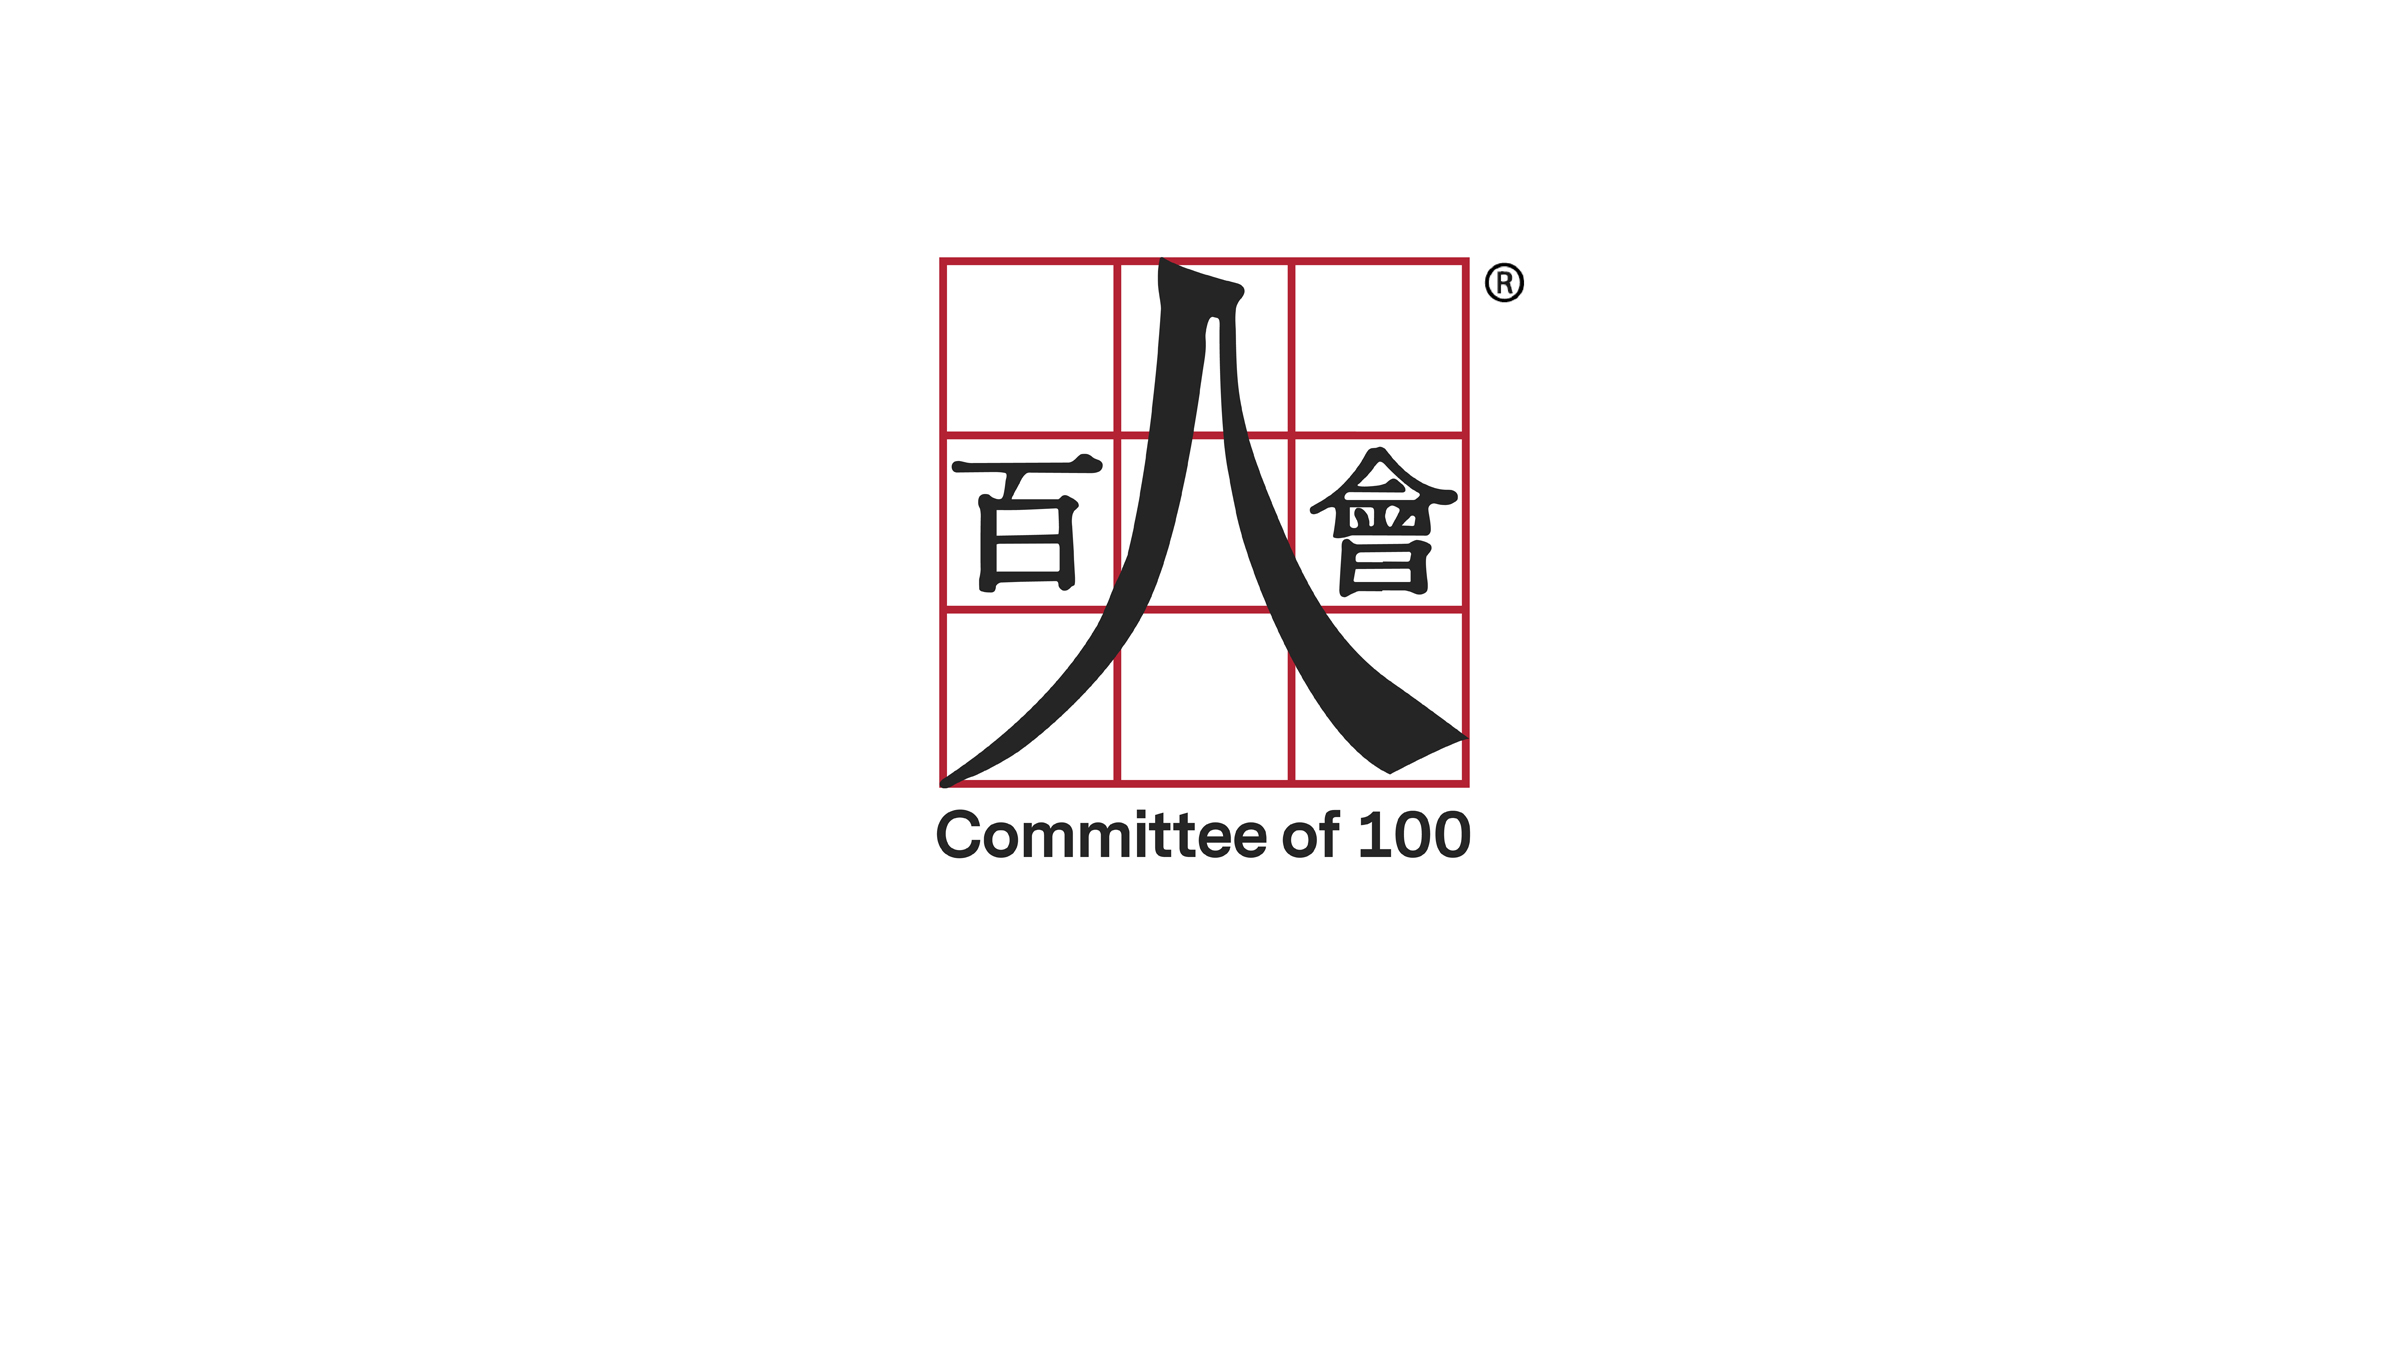 Statement from Committee of 100 on the State of New Jersey Requiring Asian American and Pacific Islander History to be Taught in Public Schools